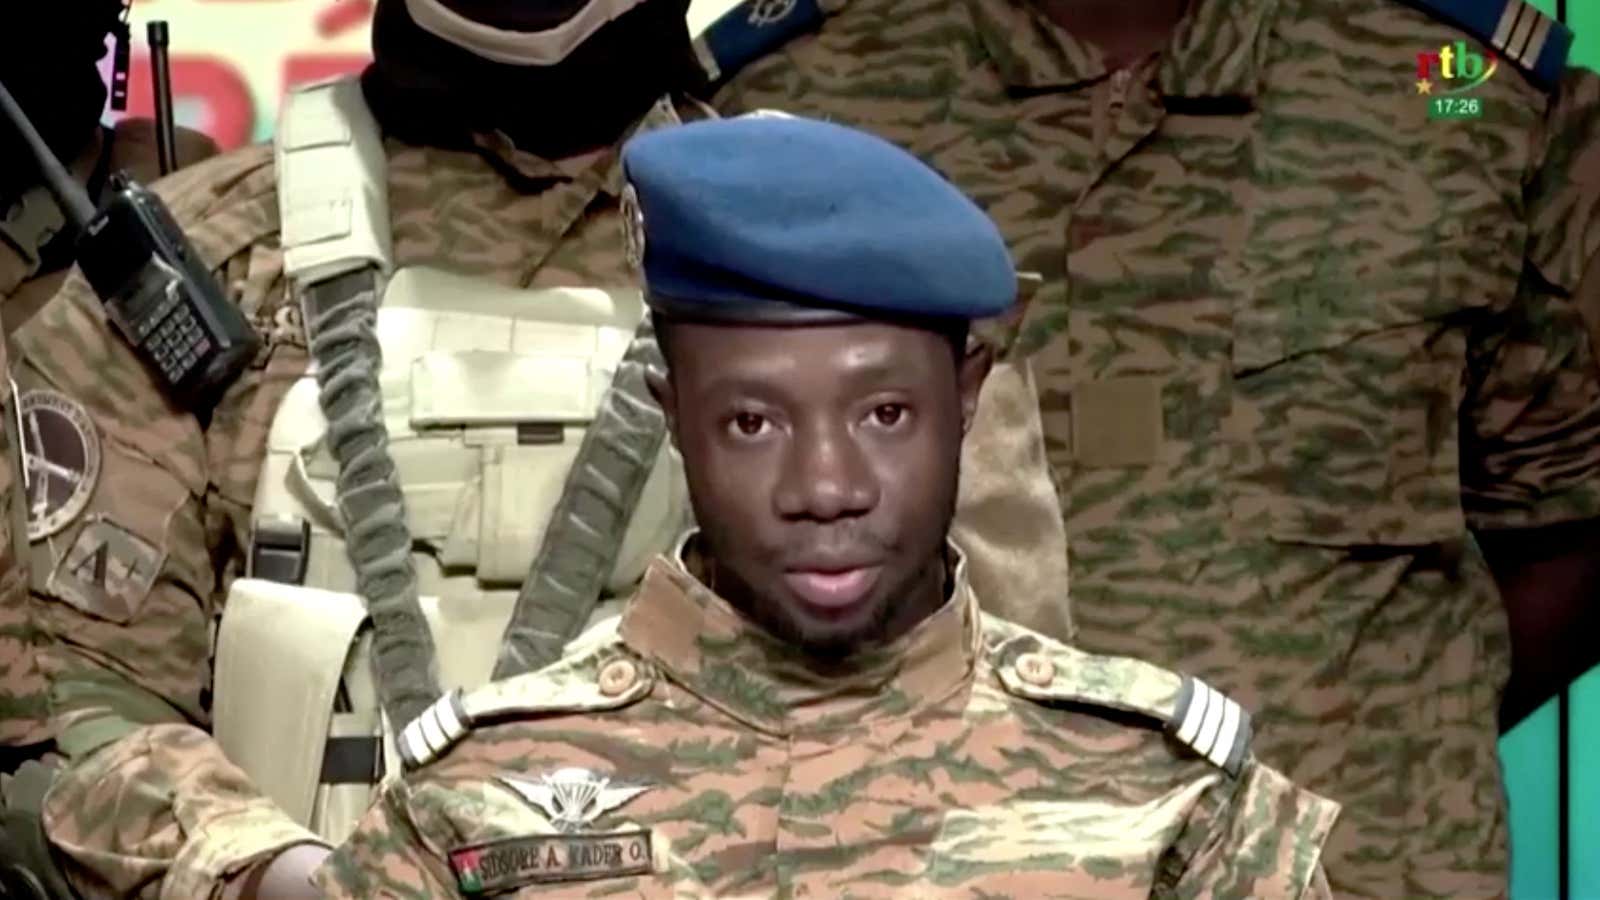 Another military officer addressing a west African nation on TV? That’s becoming too familiar